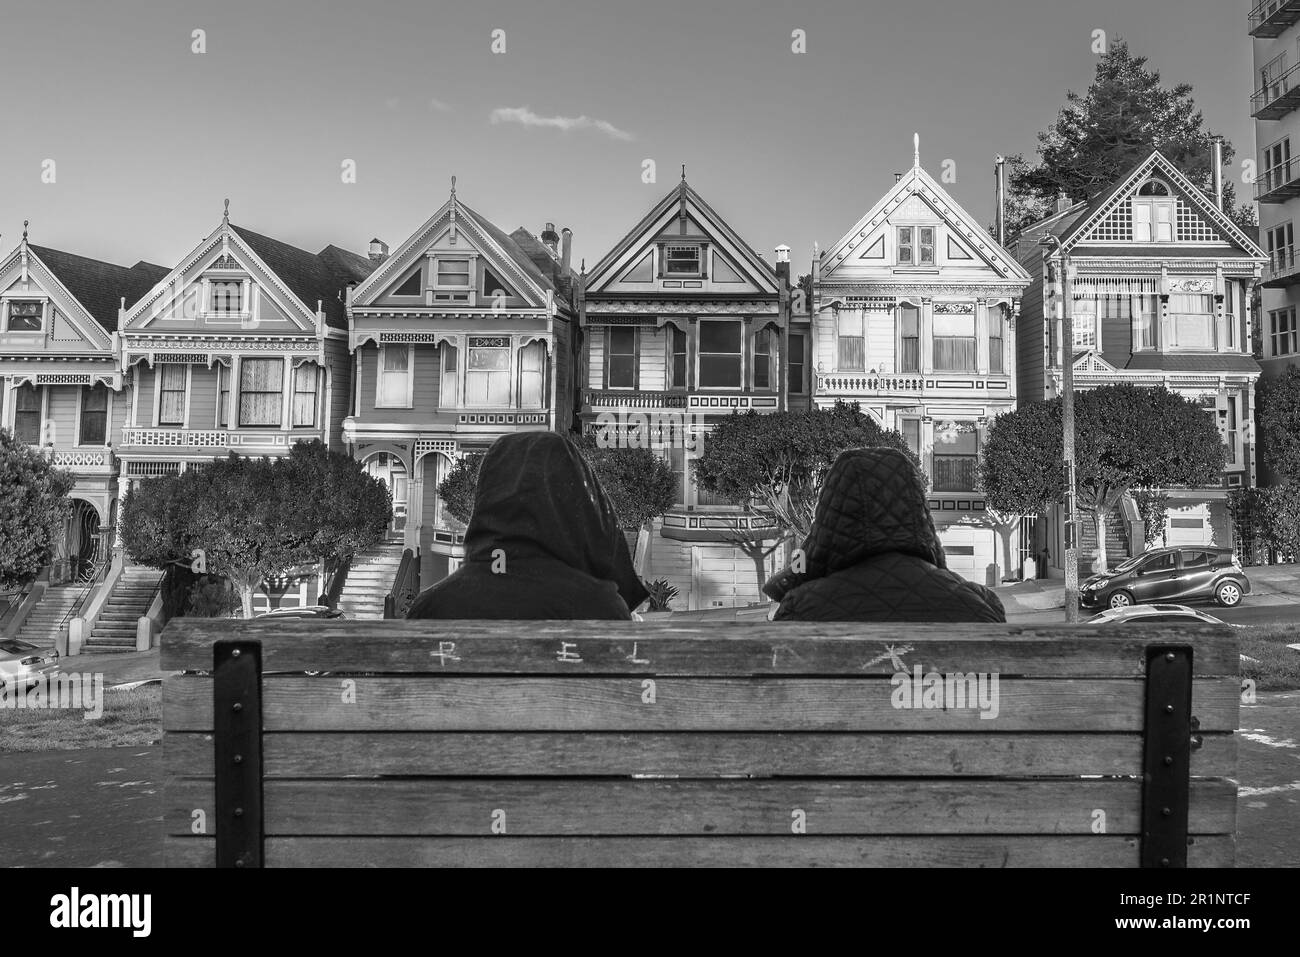 Two people sitting on their backs looking at Painted Ladies. Stock Photo